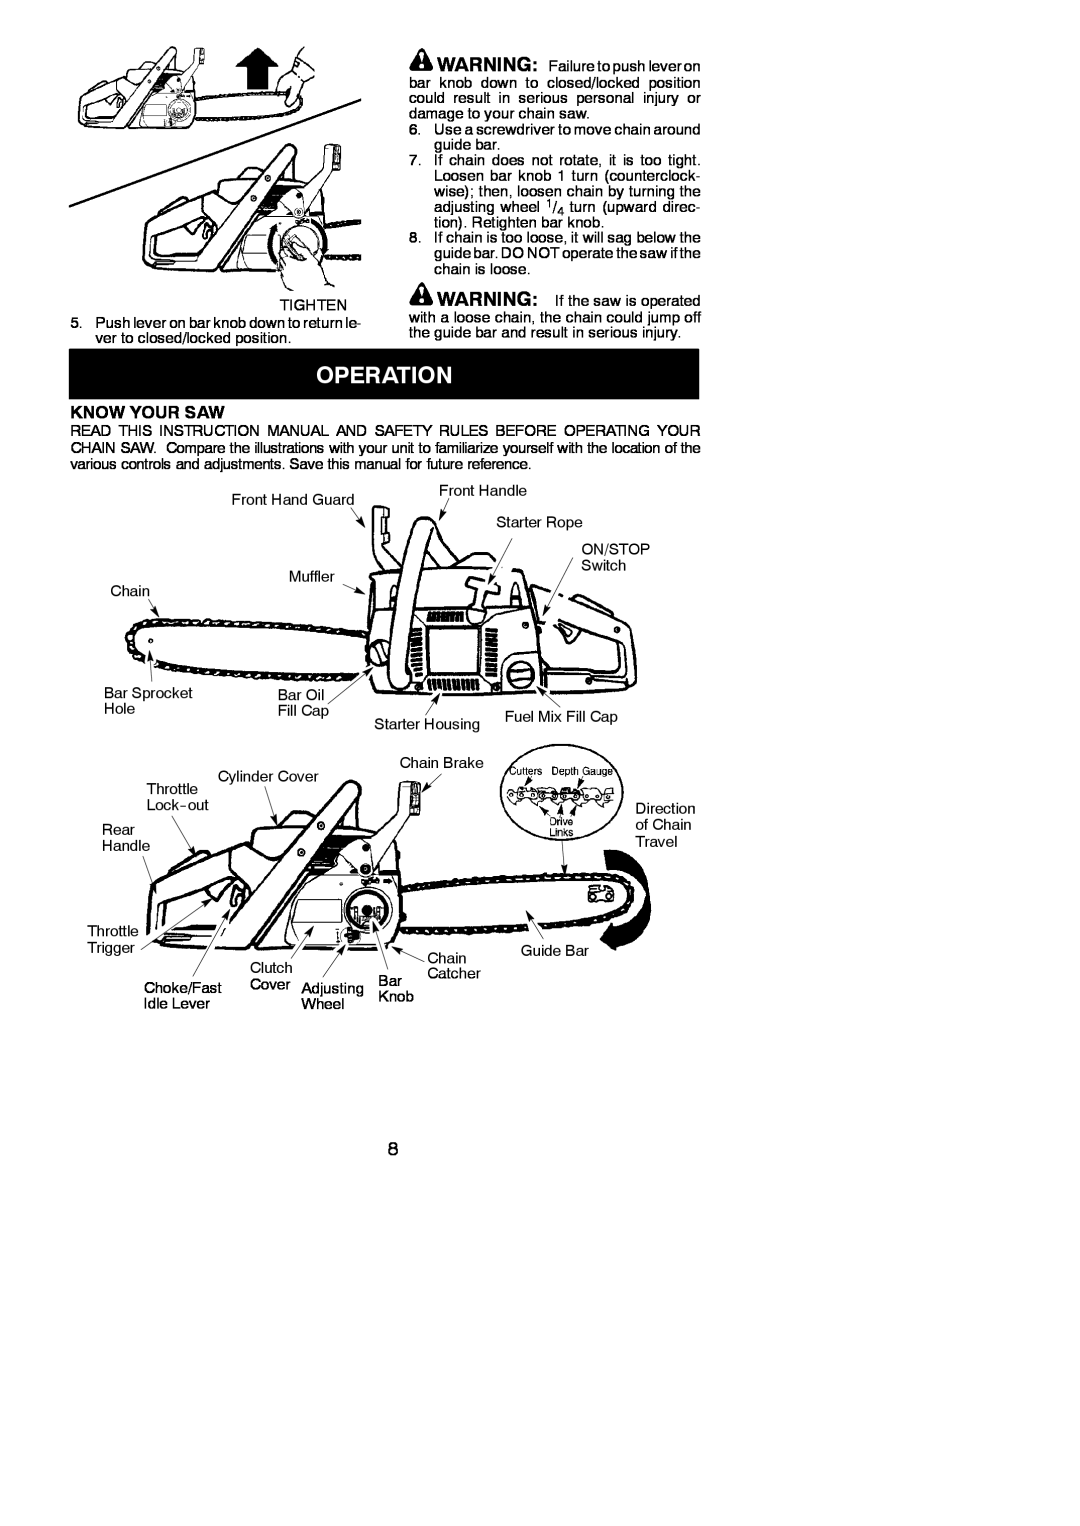 Poulan PP4620AVX instruction manual Operation, Know Your Saw 